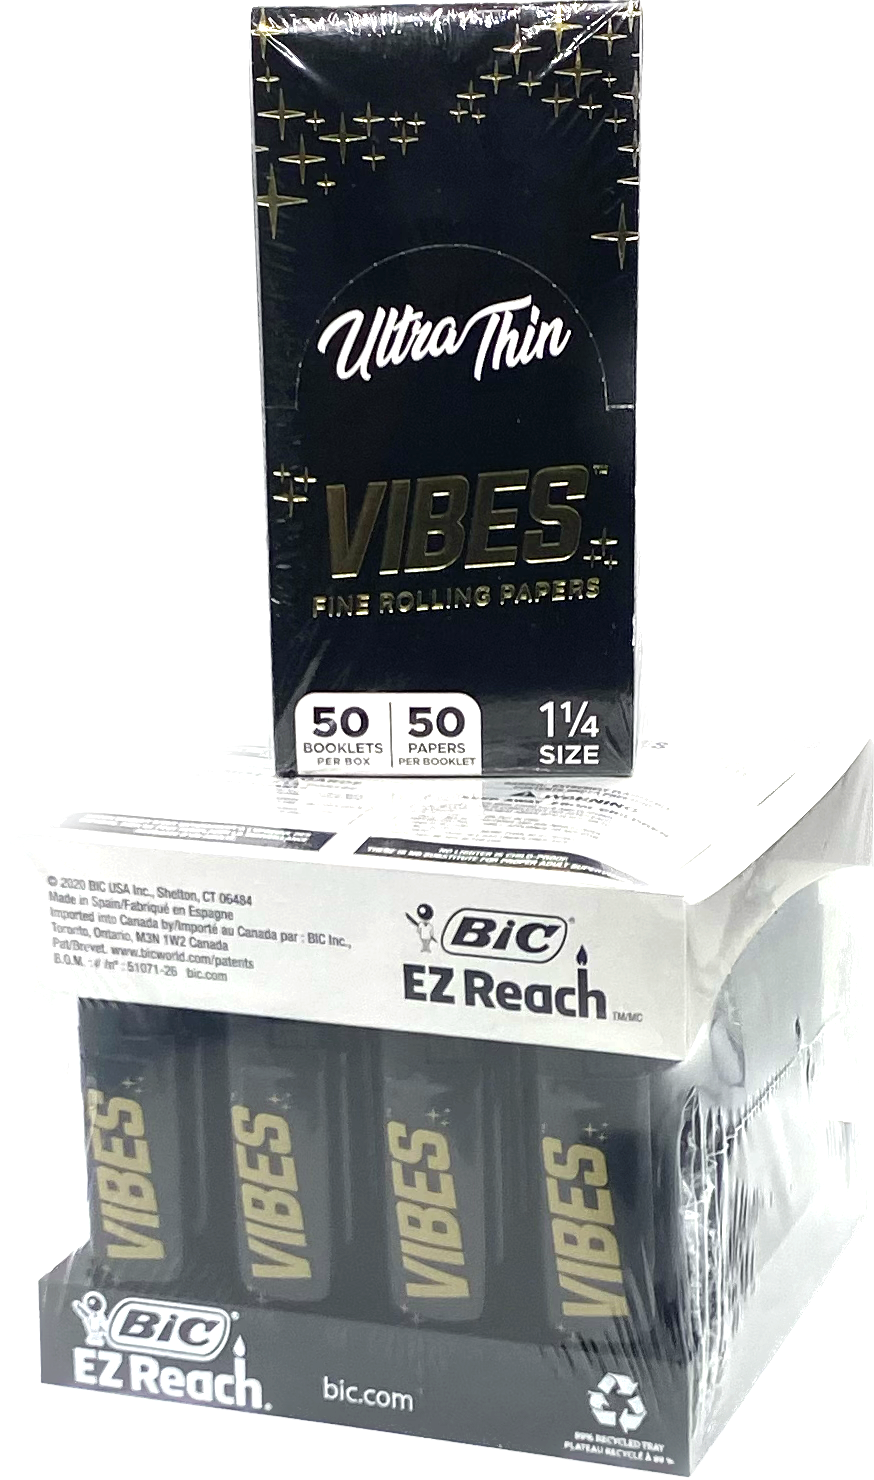 VIBES Black EZ Reach Bic 40ct Lighters w/ Free VIBES Ultra Thin 1 1/4 Box 50 Leaves Per Booklet / 50 Booklets Per Box